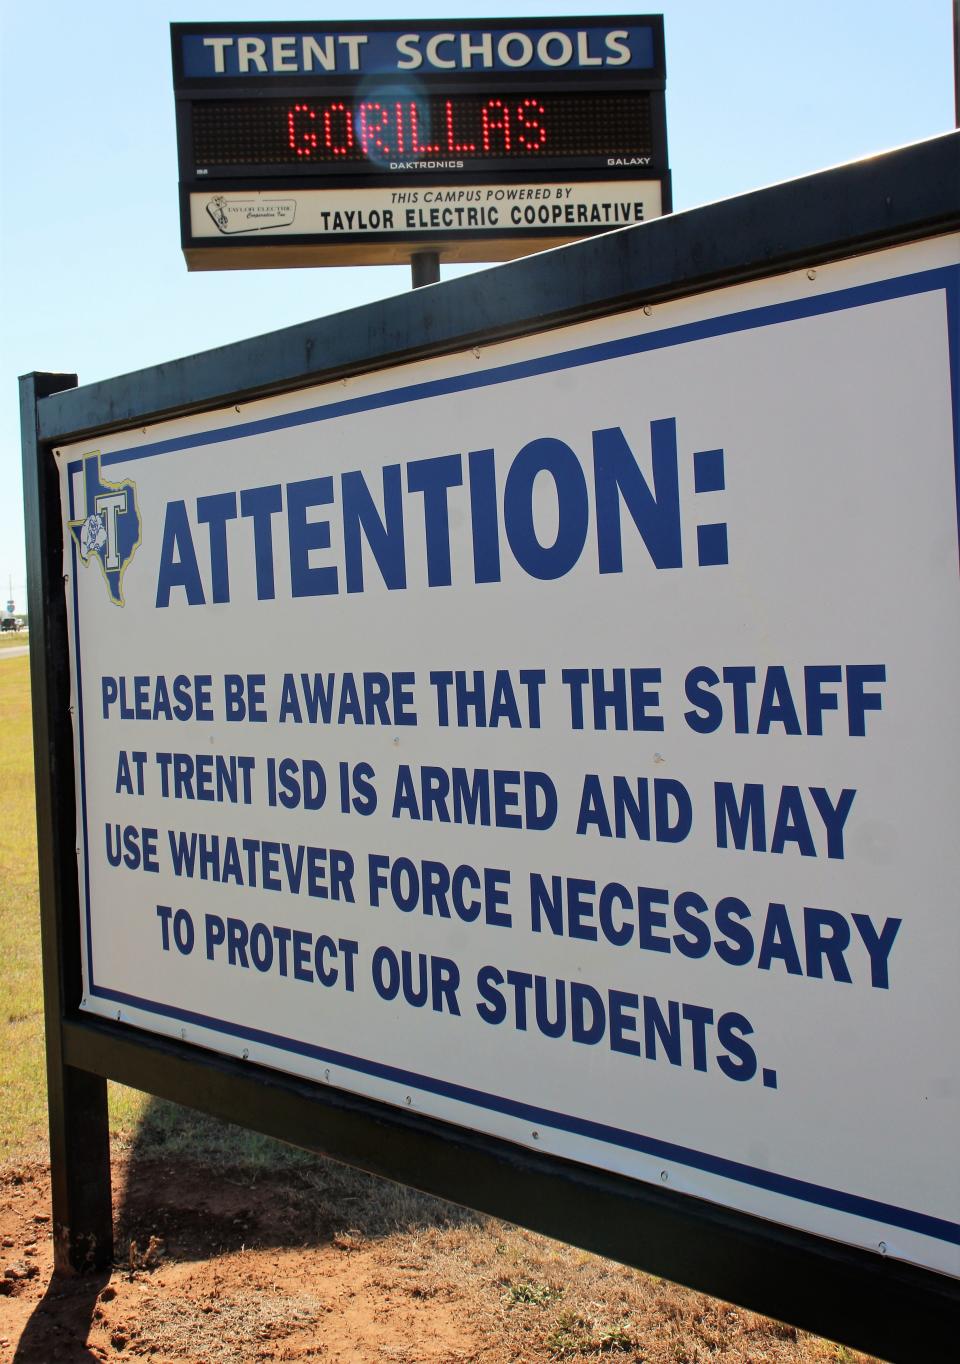 Signage at the entrance to the Trent ISD campus warns visitors that school personnel are ready to protect students. The campus faces Interstate 20.